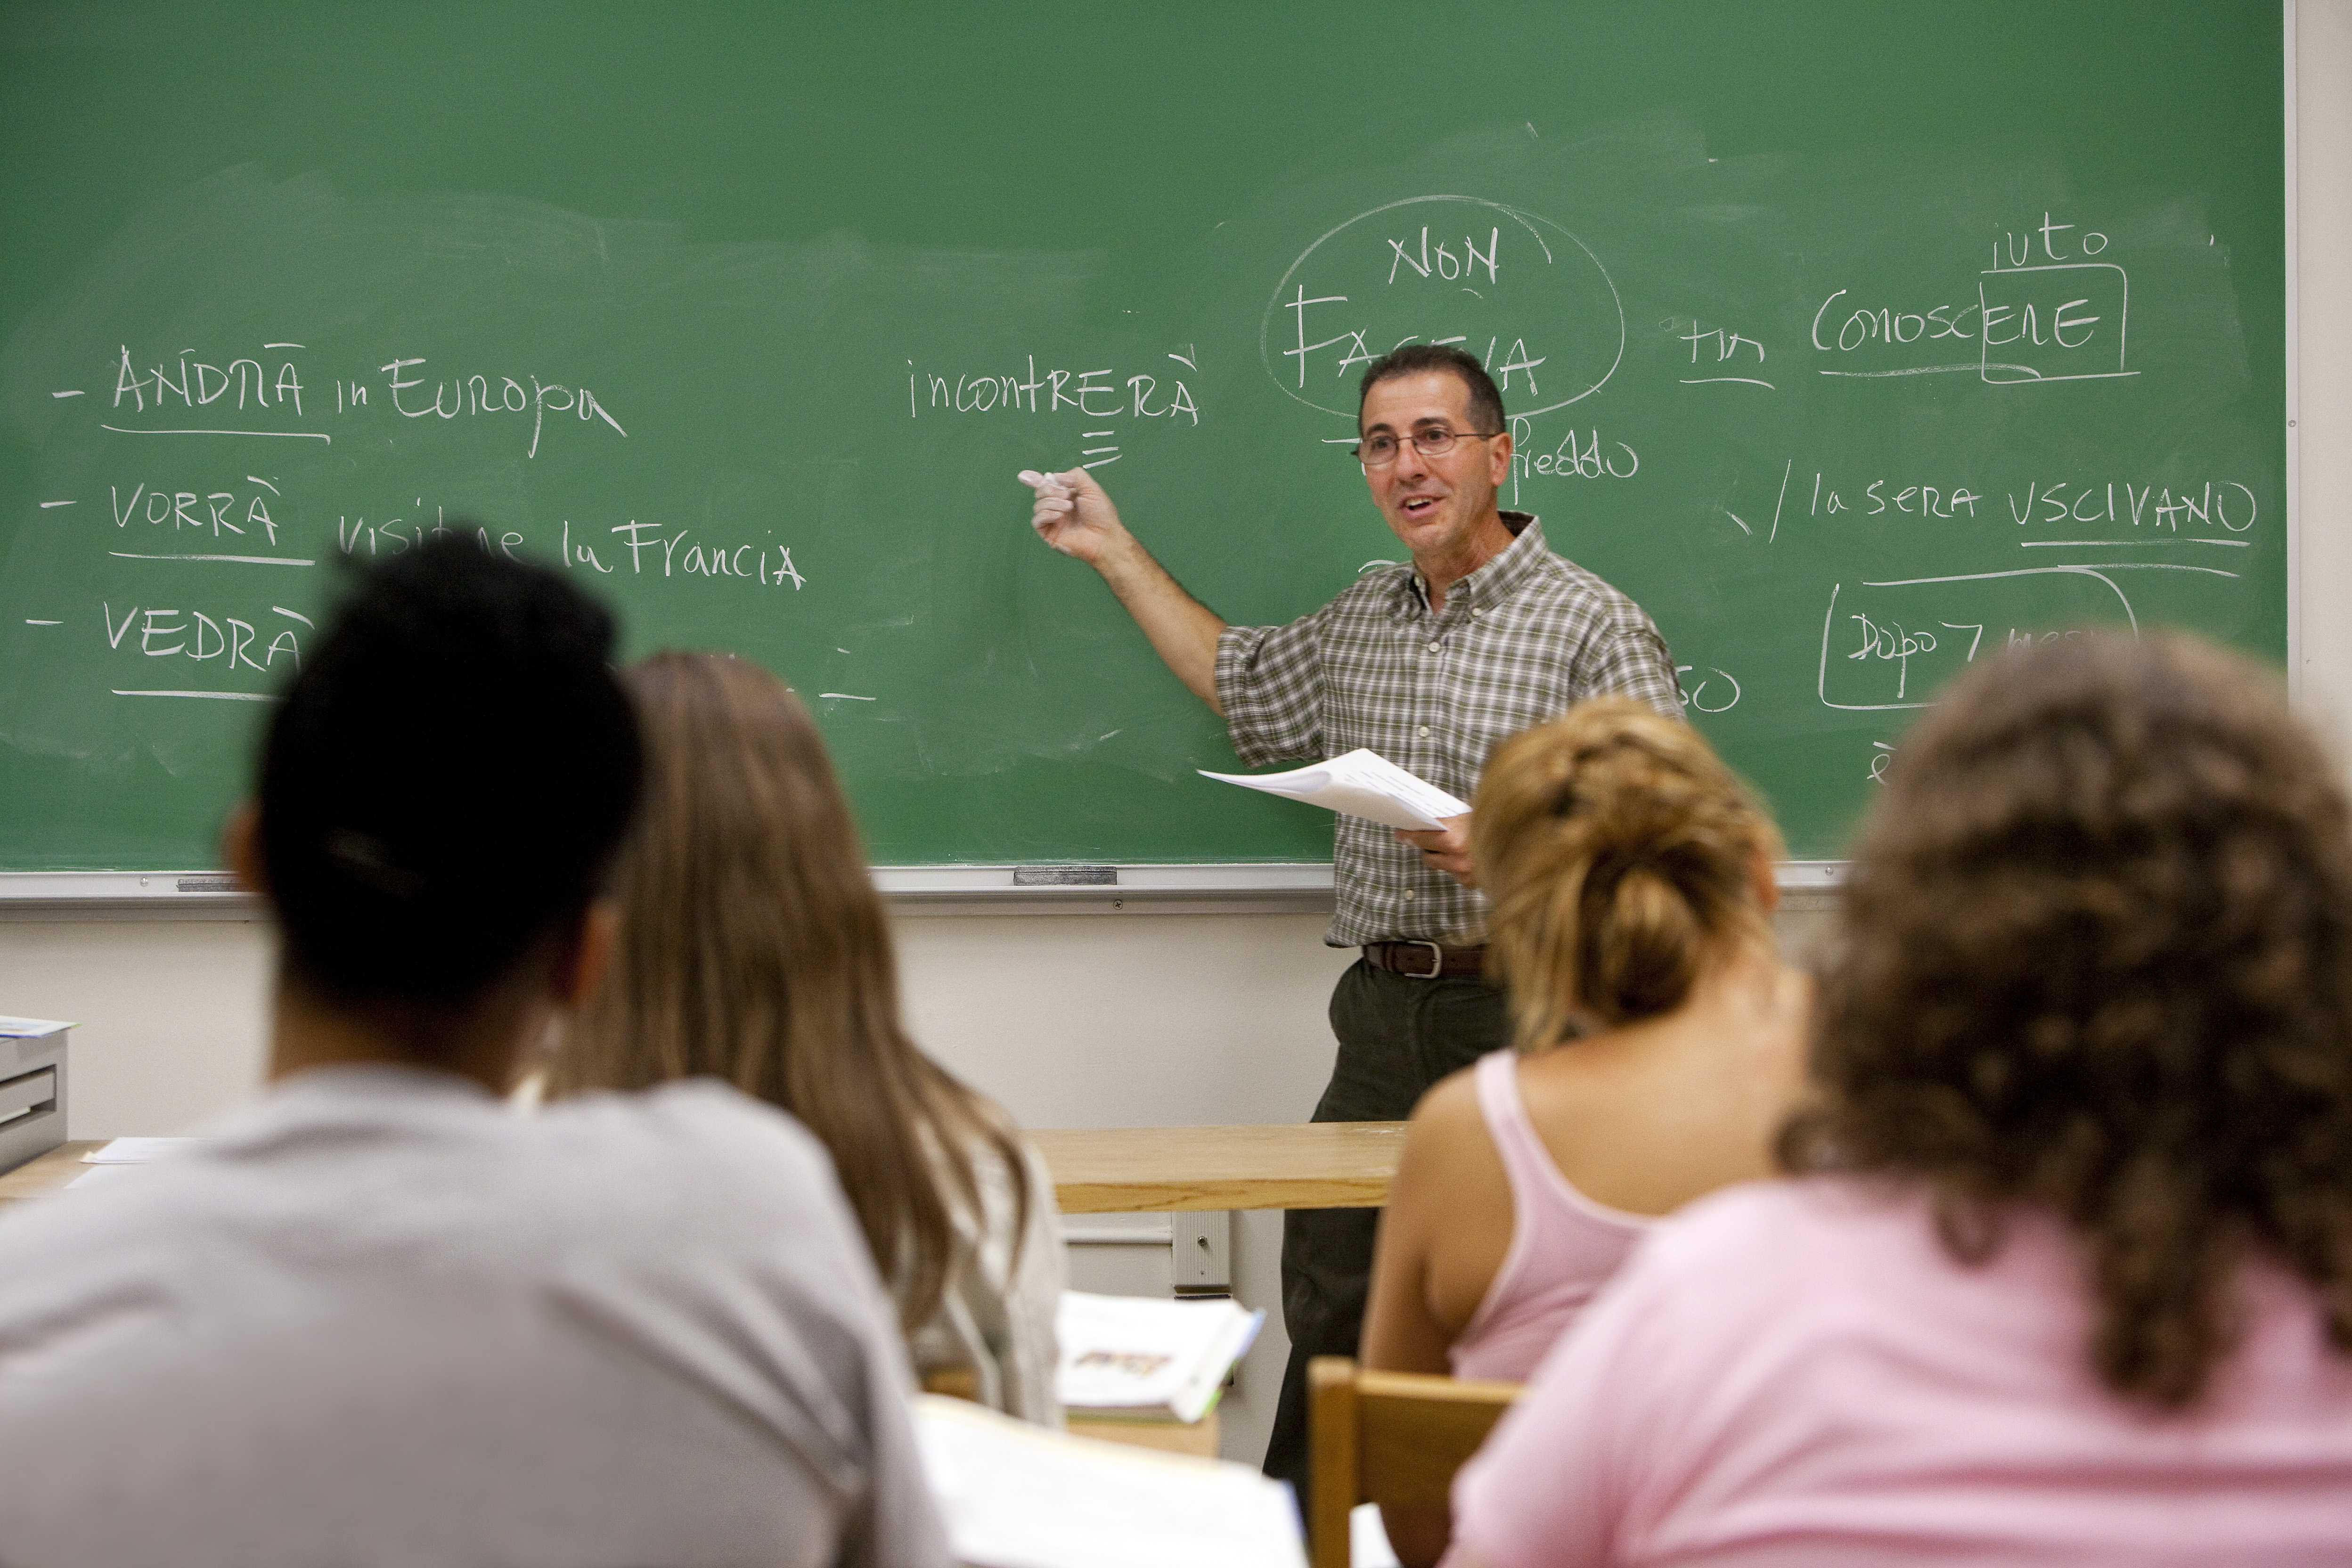 Professor teaching in front of a class using the chalkboard